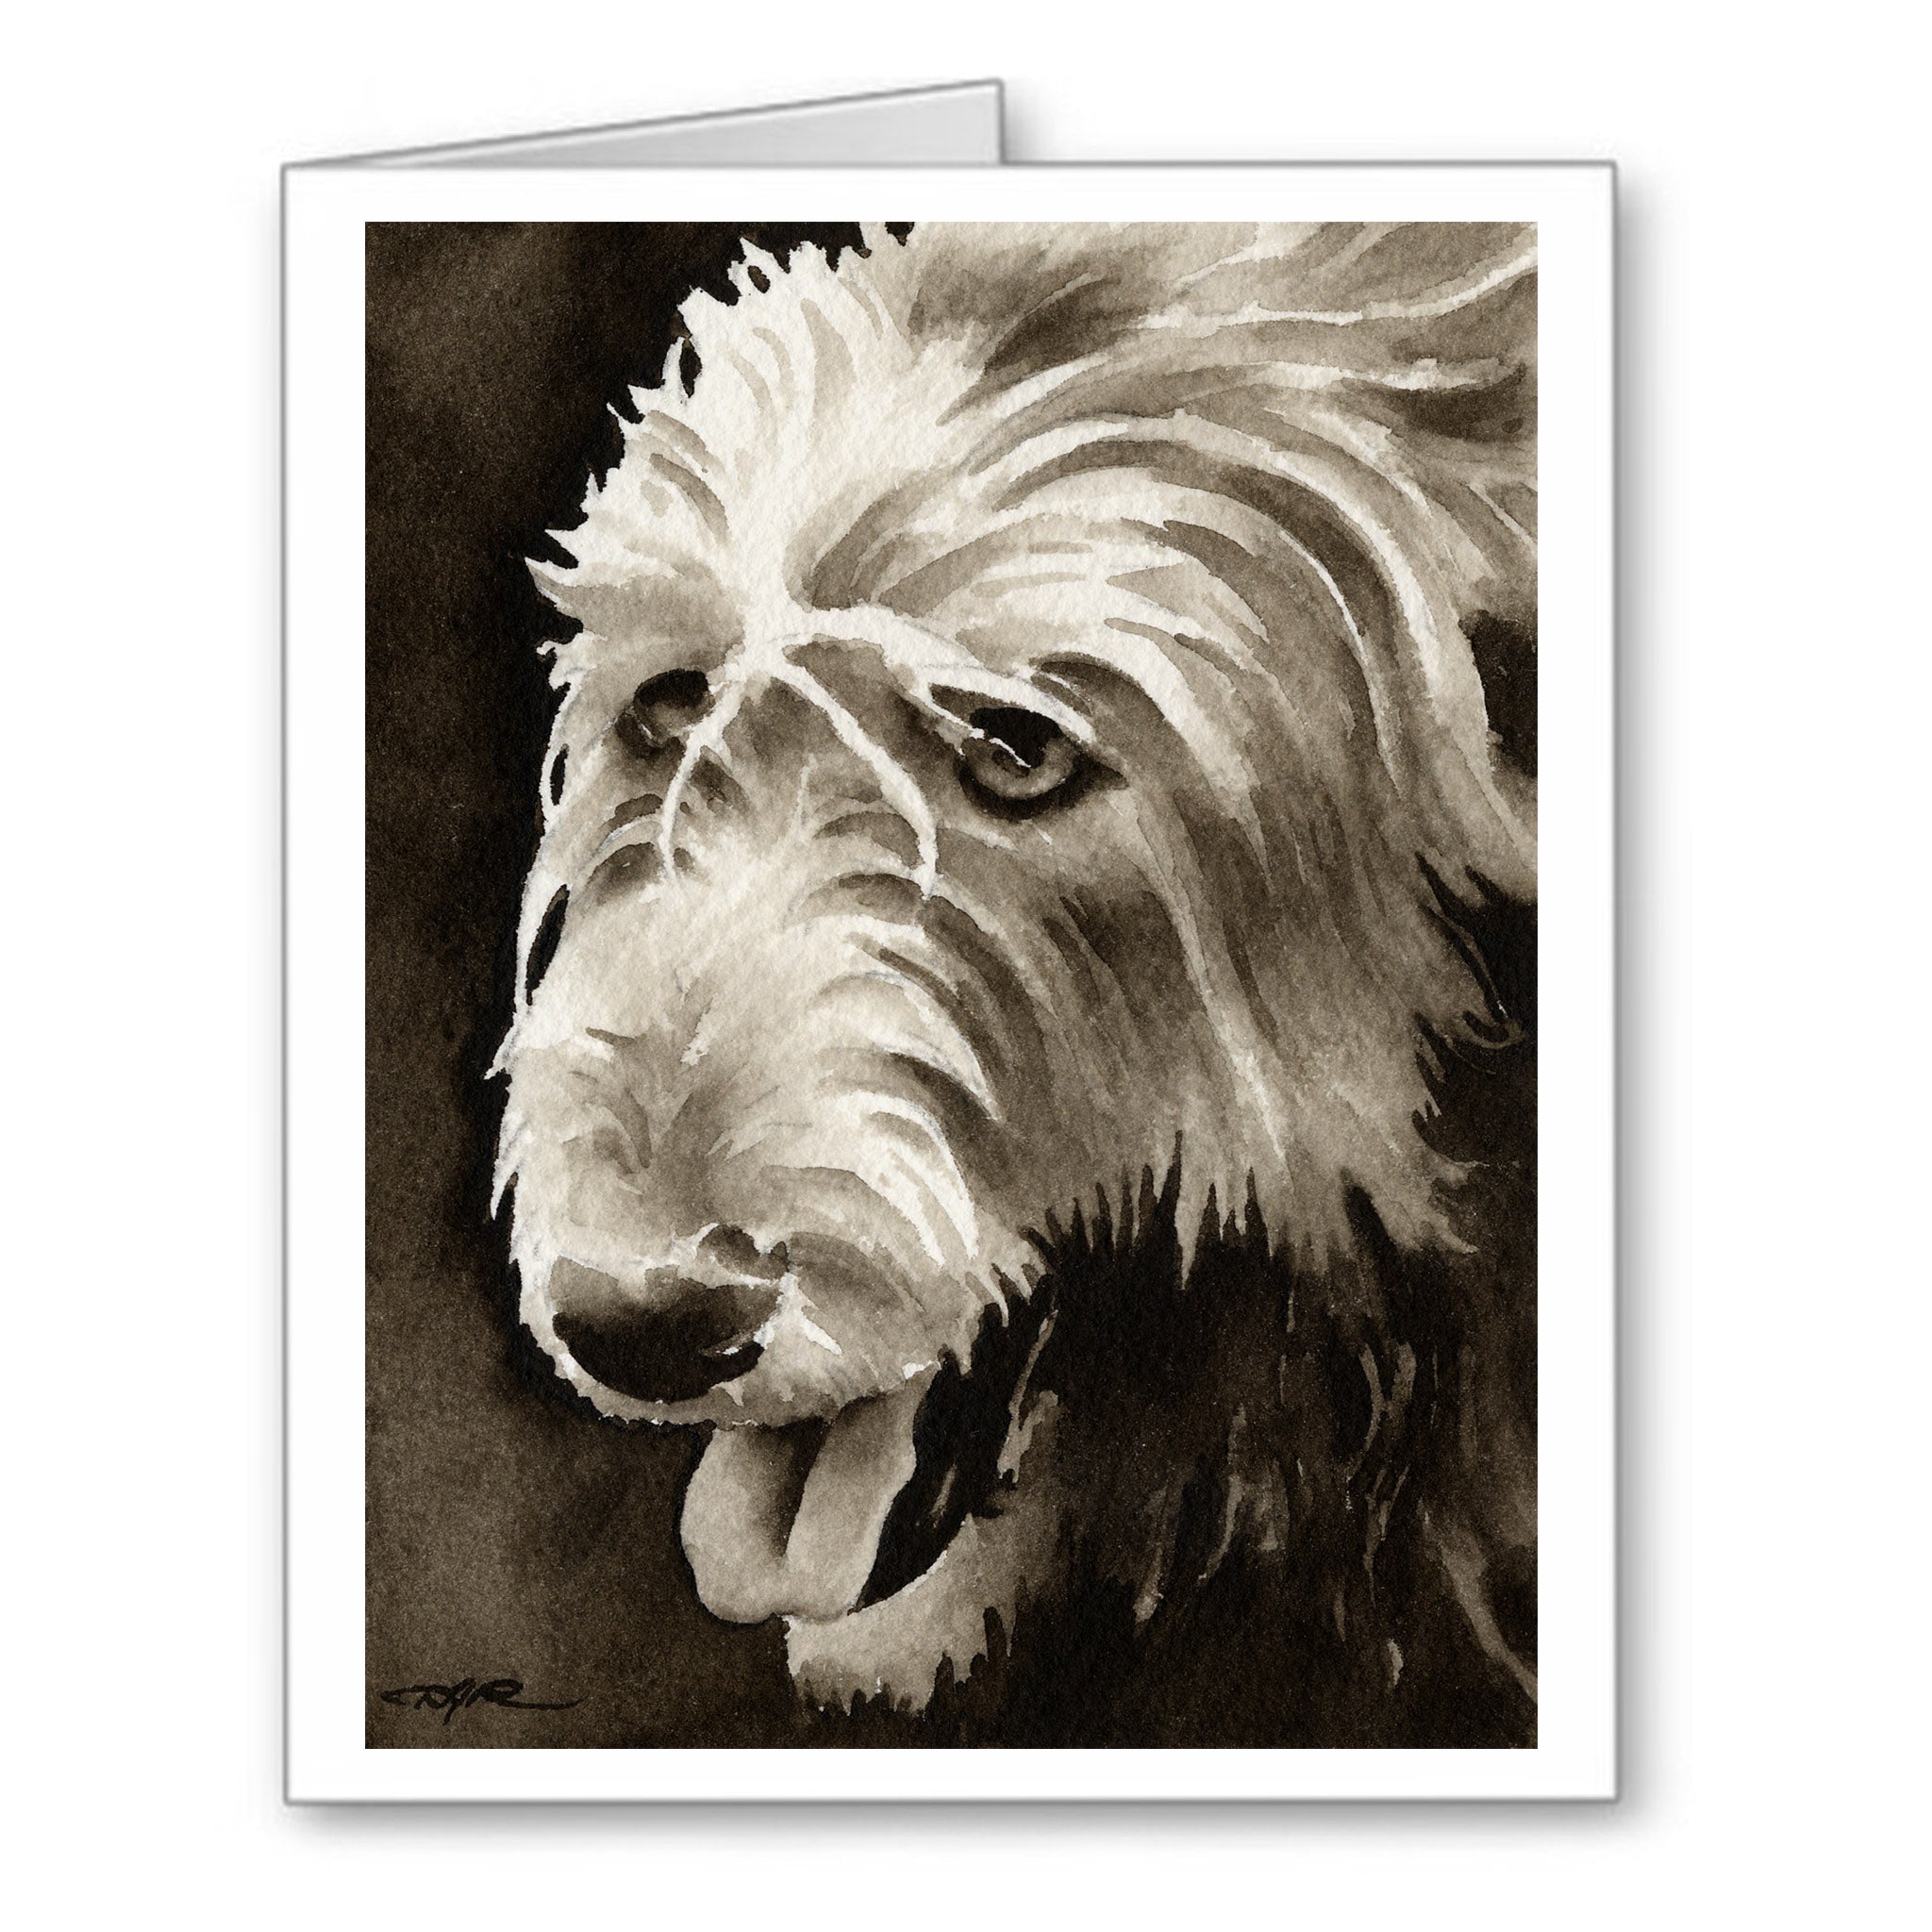 Irish Wolfhound Watercolor Note Card Art by Artist DJ Rogers